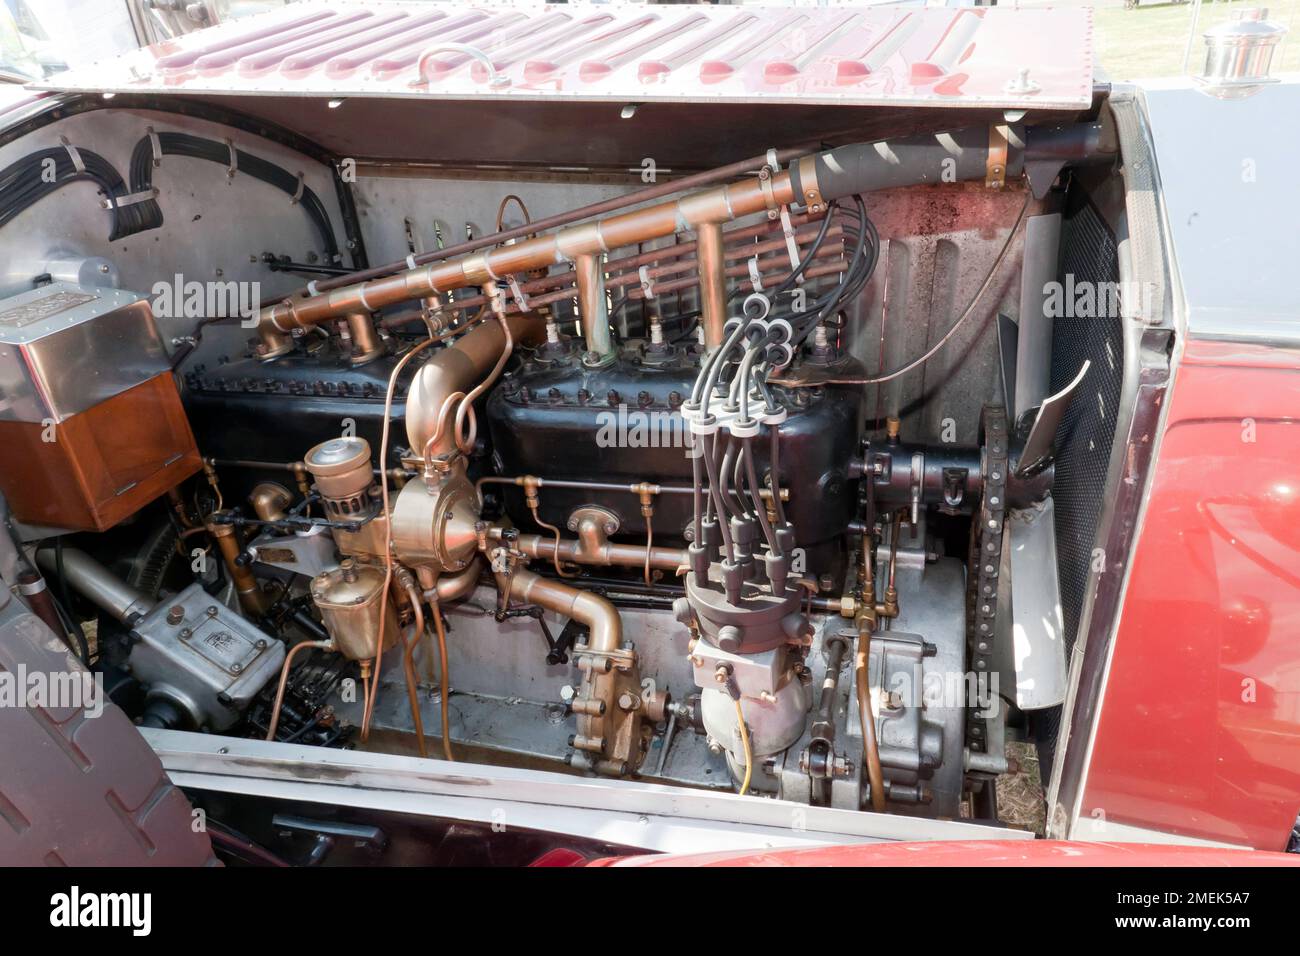 The Engine Bay of a Rolls Royce Silver Ghost 40/50hp Roadster, circa 1914, on display at the 2022 Silverstone Classic Stock Photo